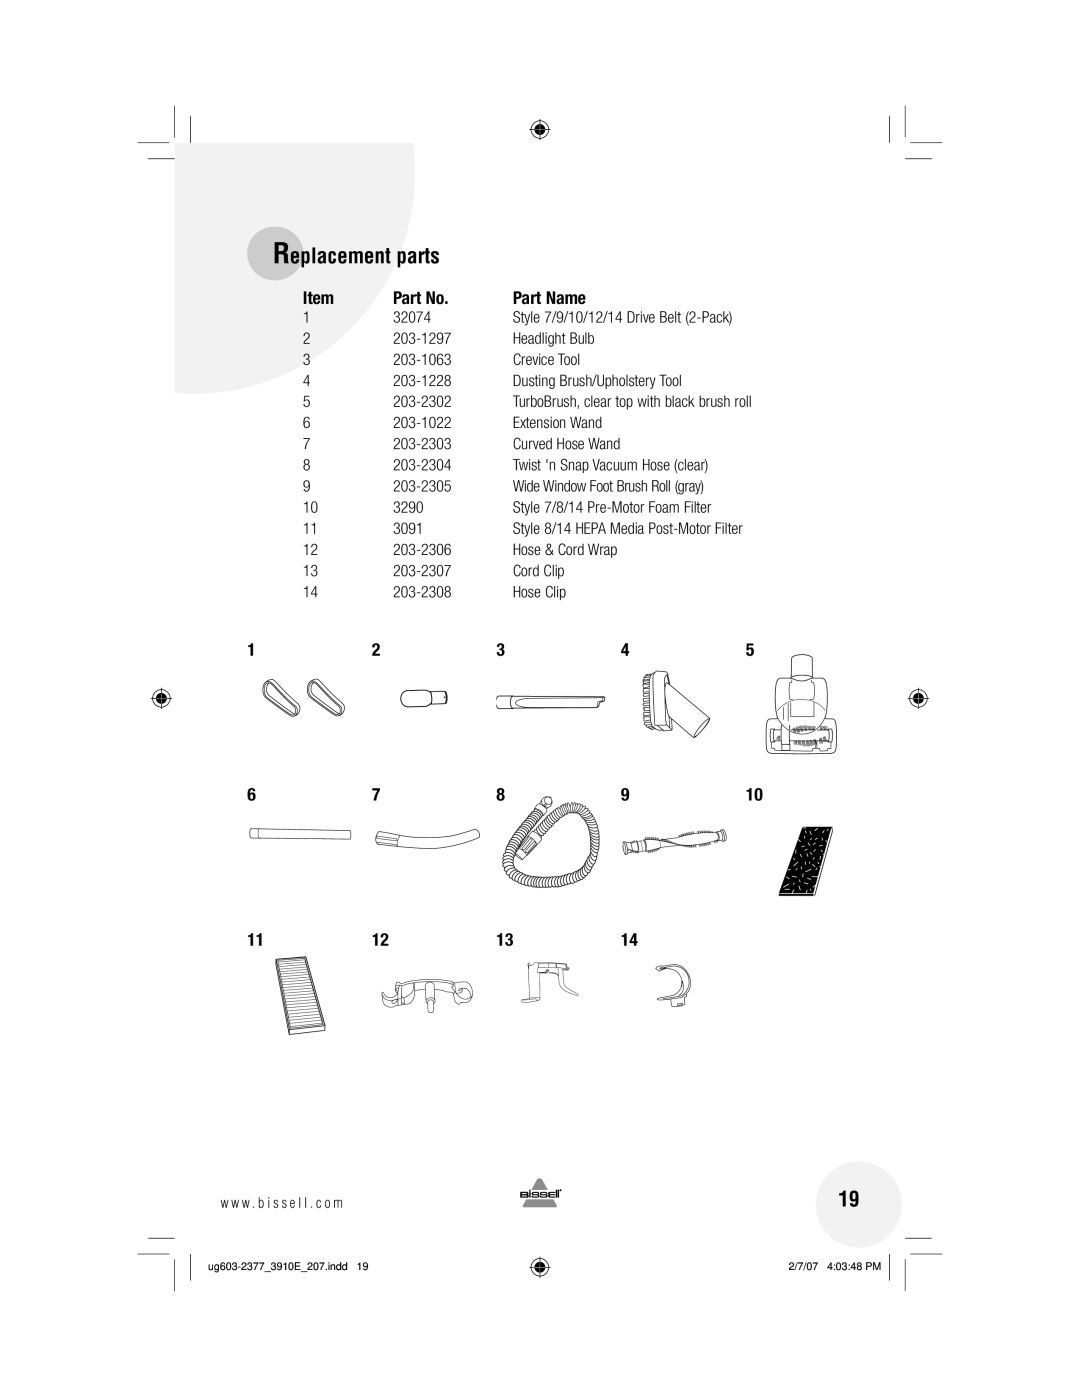 Bissell 3910 warranty Replacement parts, Part Name 